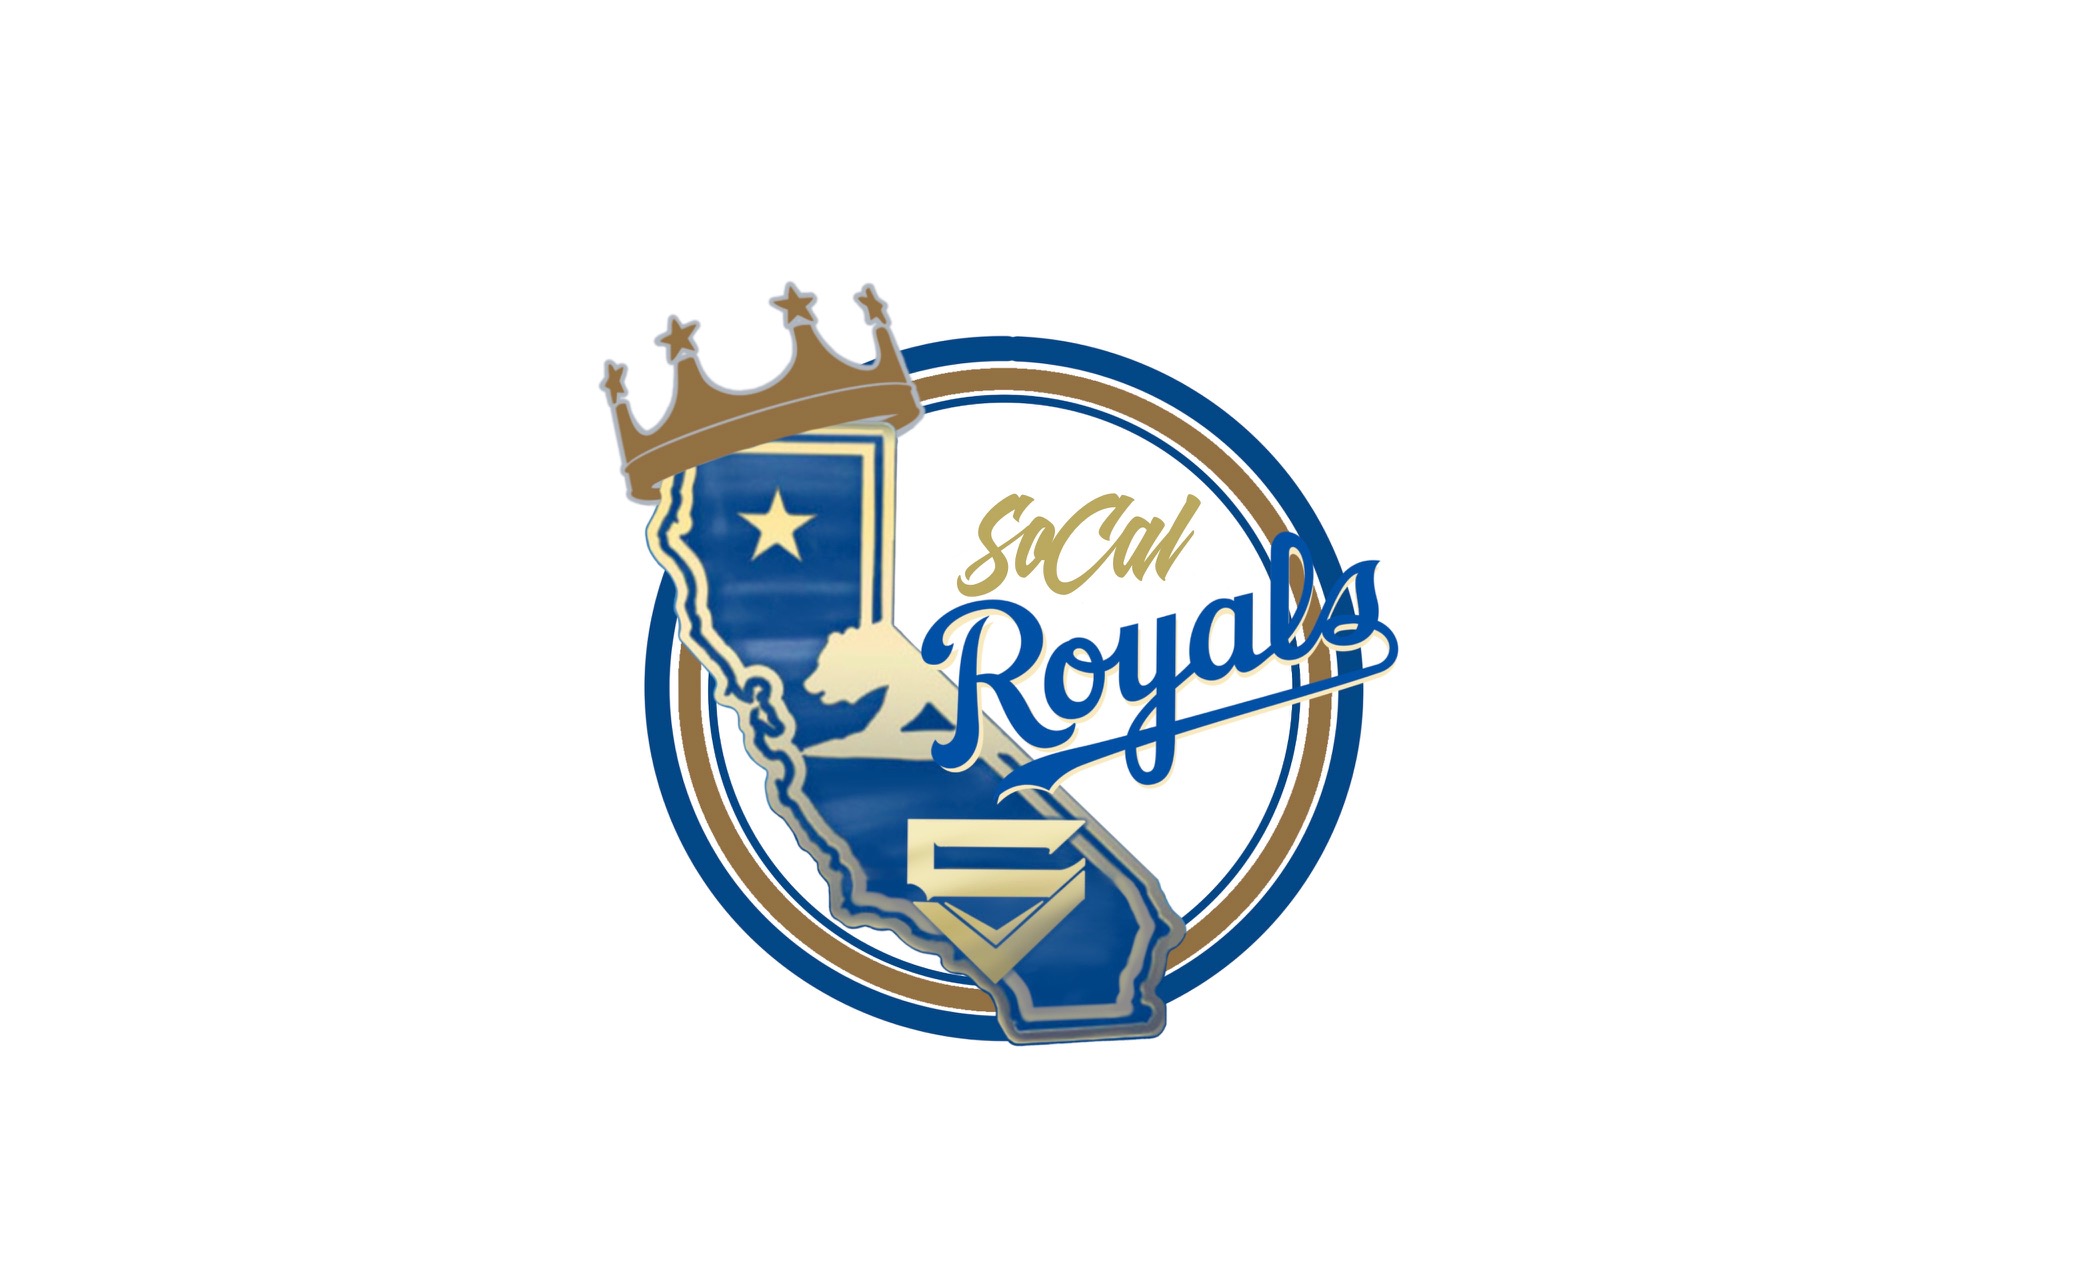 Royals Baseball – The Heart and Soul of the City